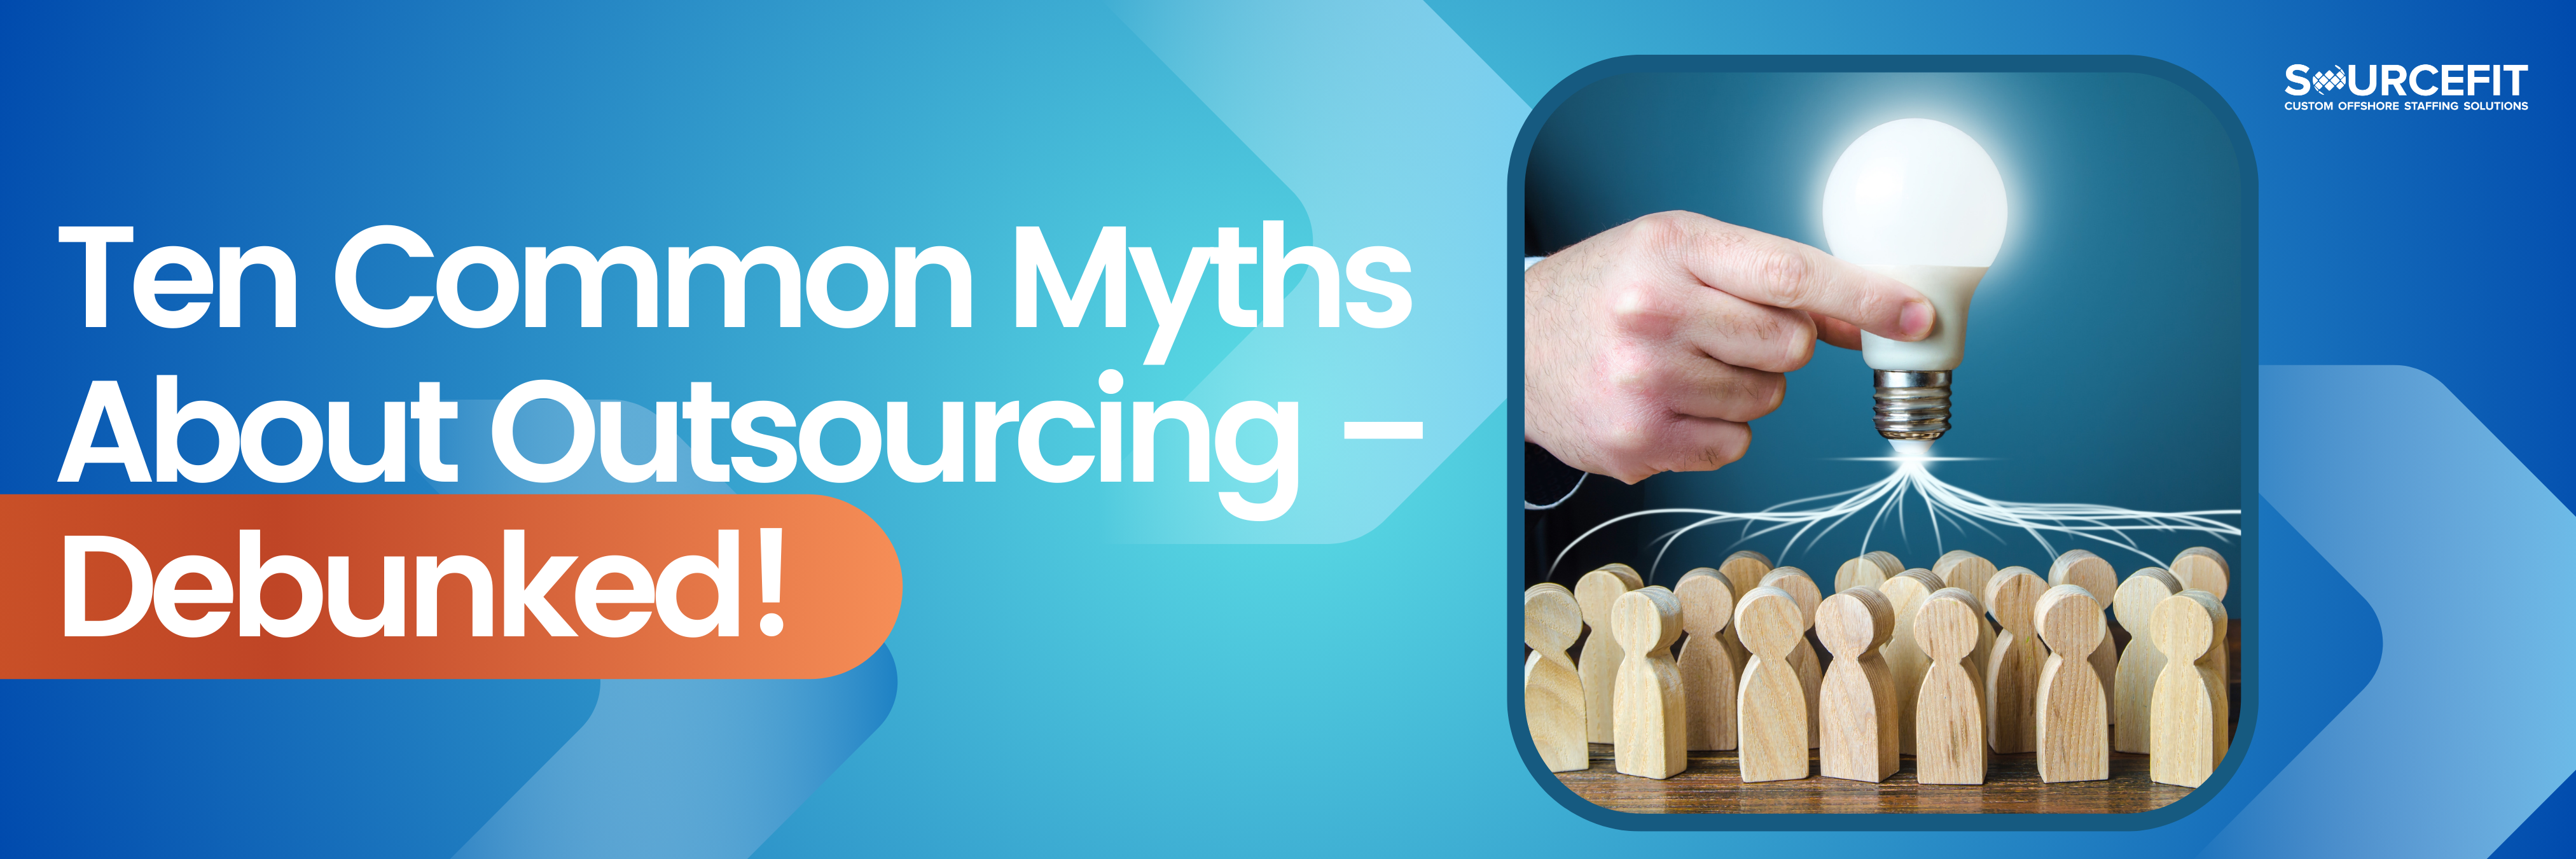 _Ten Common Myths About Outsourcing – Debunked!_Header